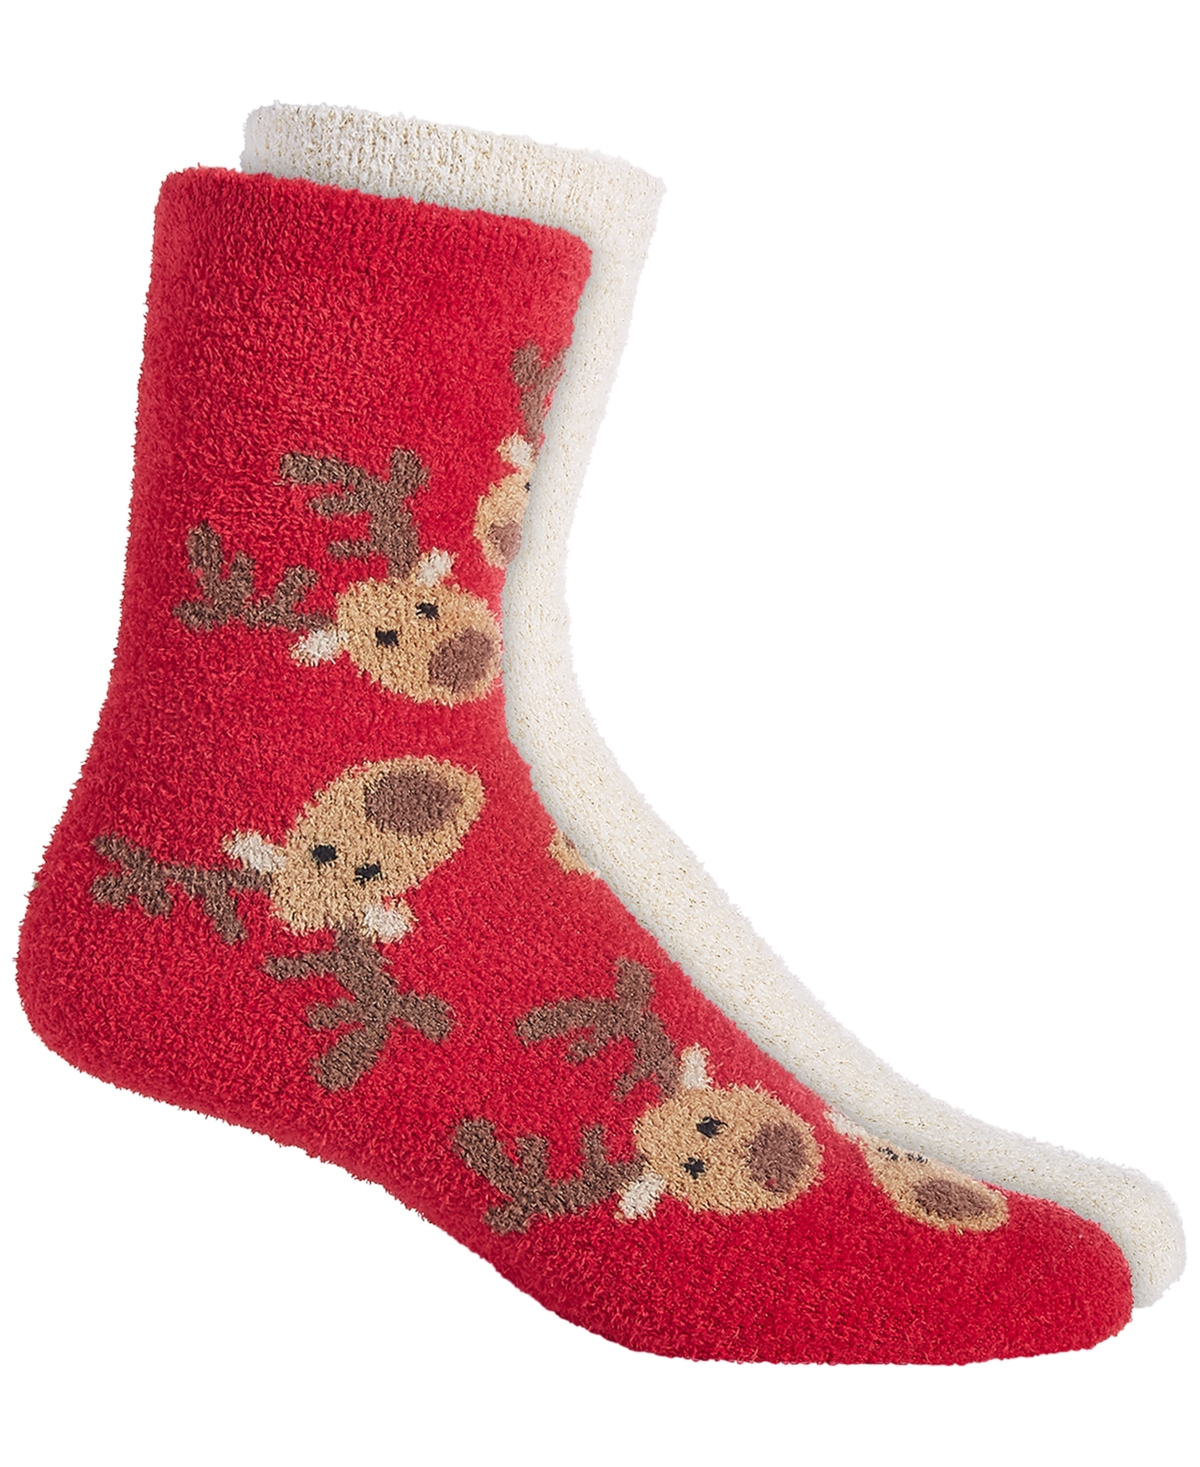 Charter Club Women's 2-pack Holiday Fuzzy Butter Socks In Tossed Reindeer